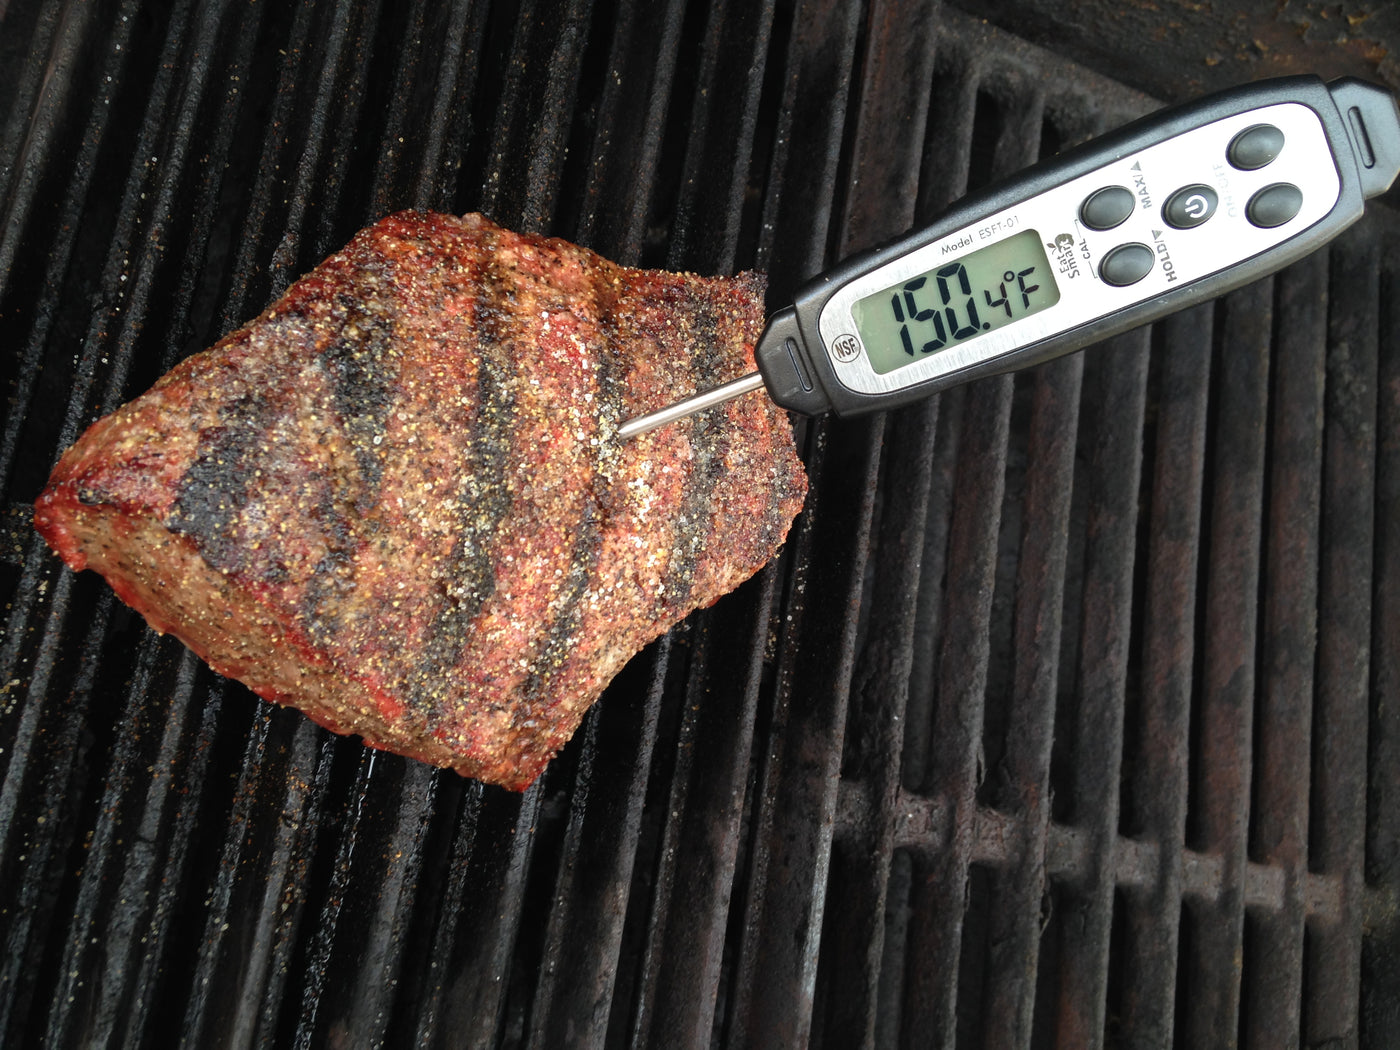 Digital Food Thermometers 101 – FAQs, Safety + Calibration Tips